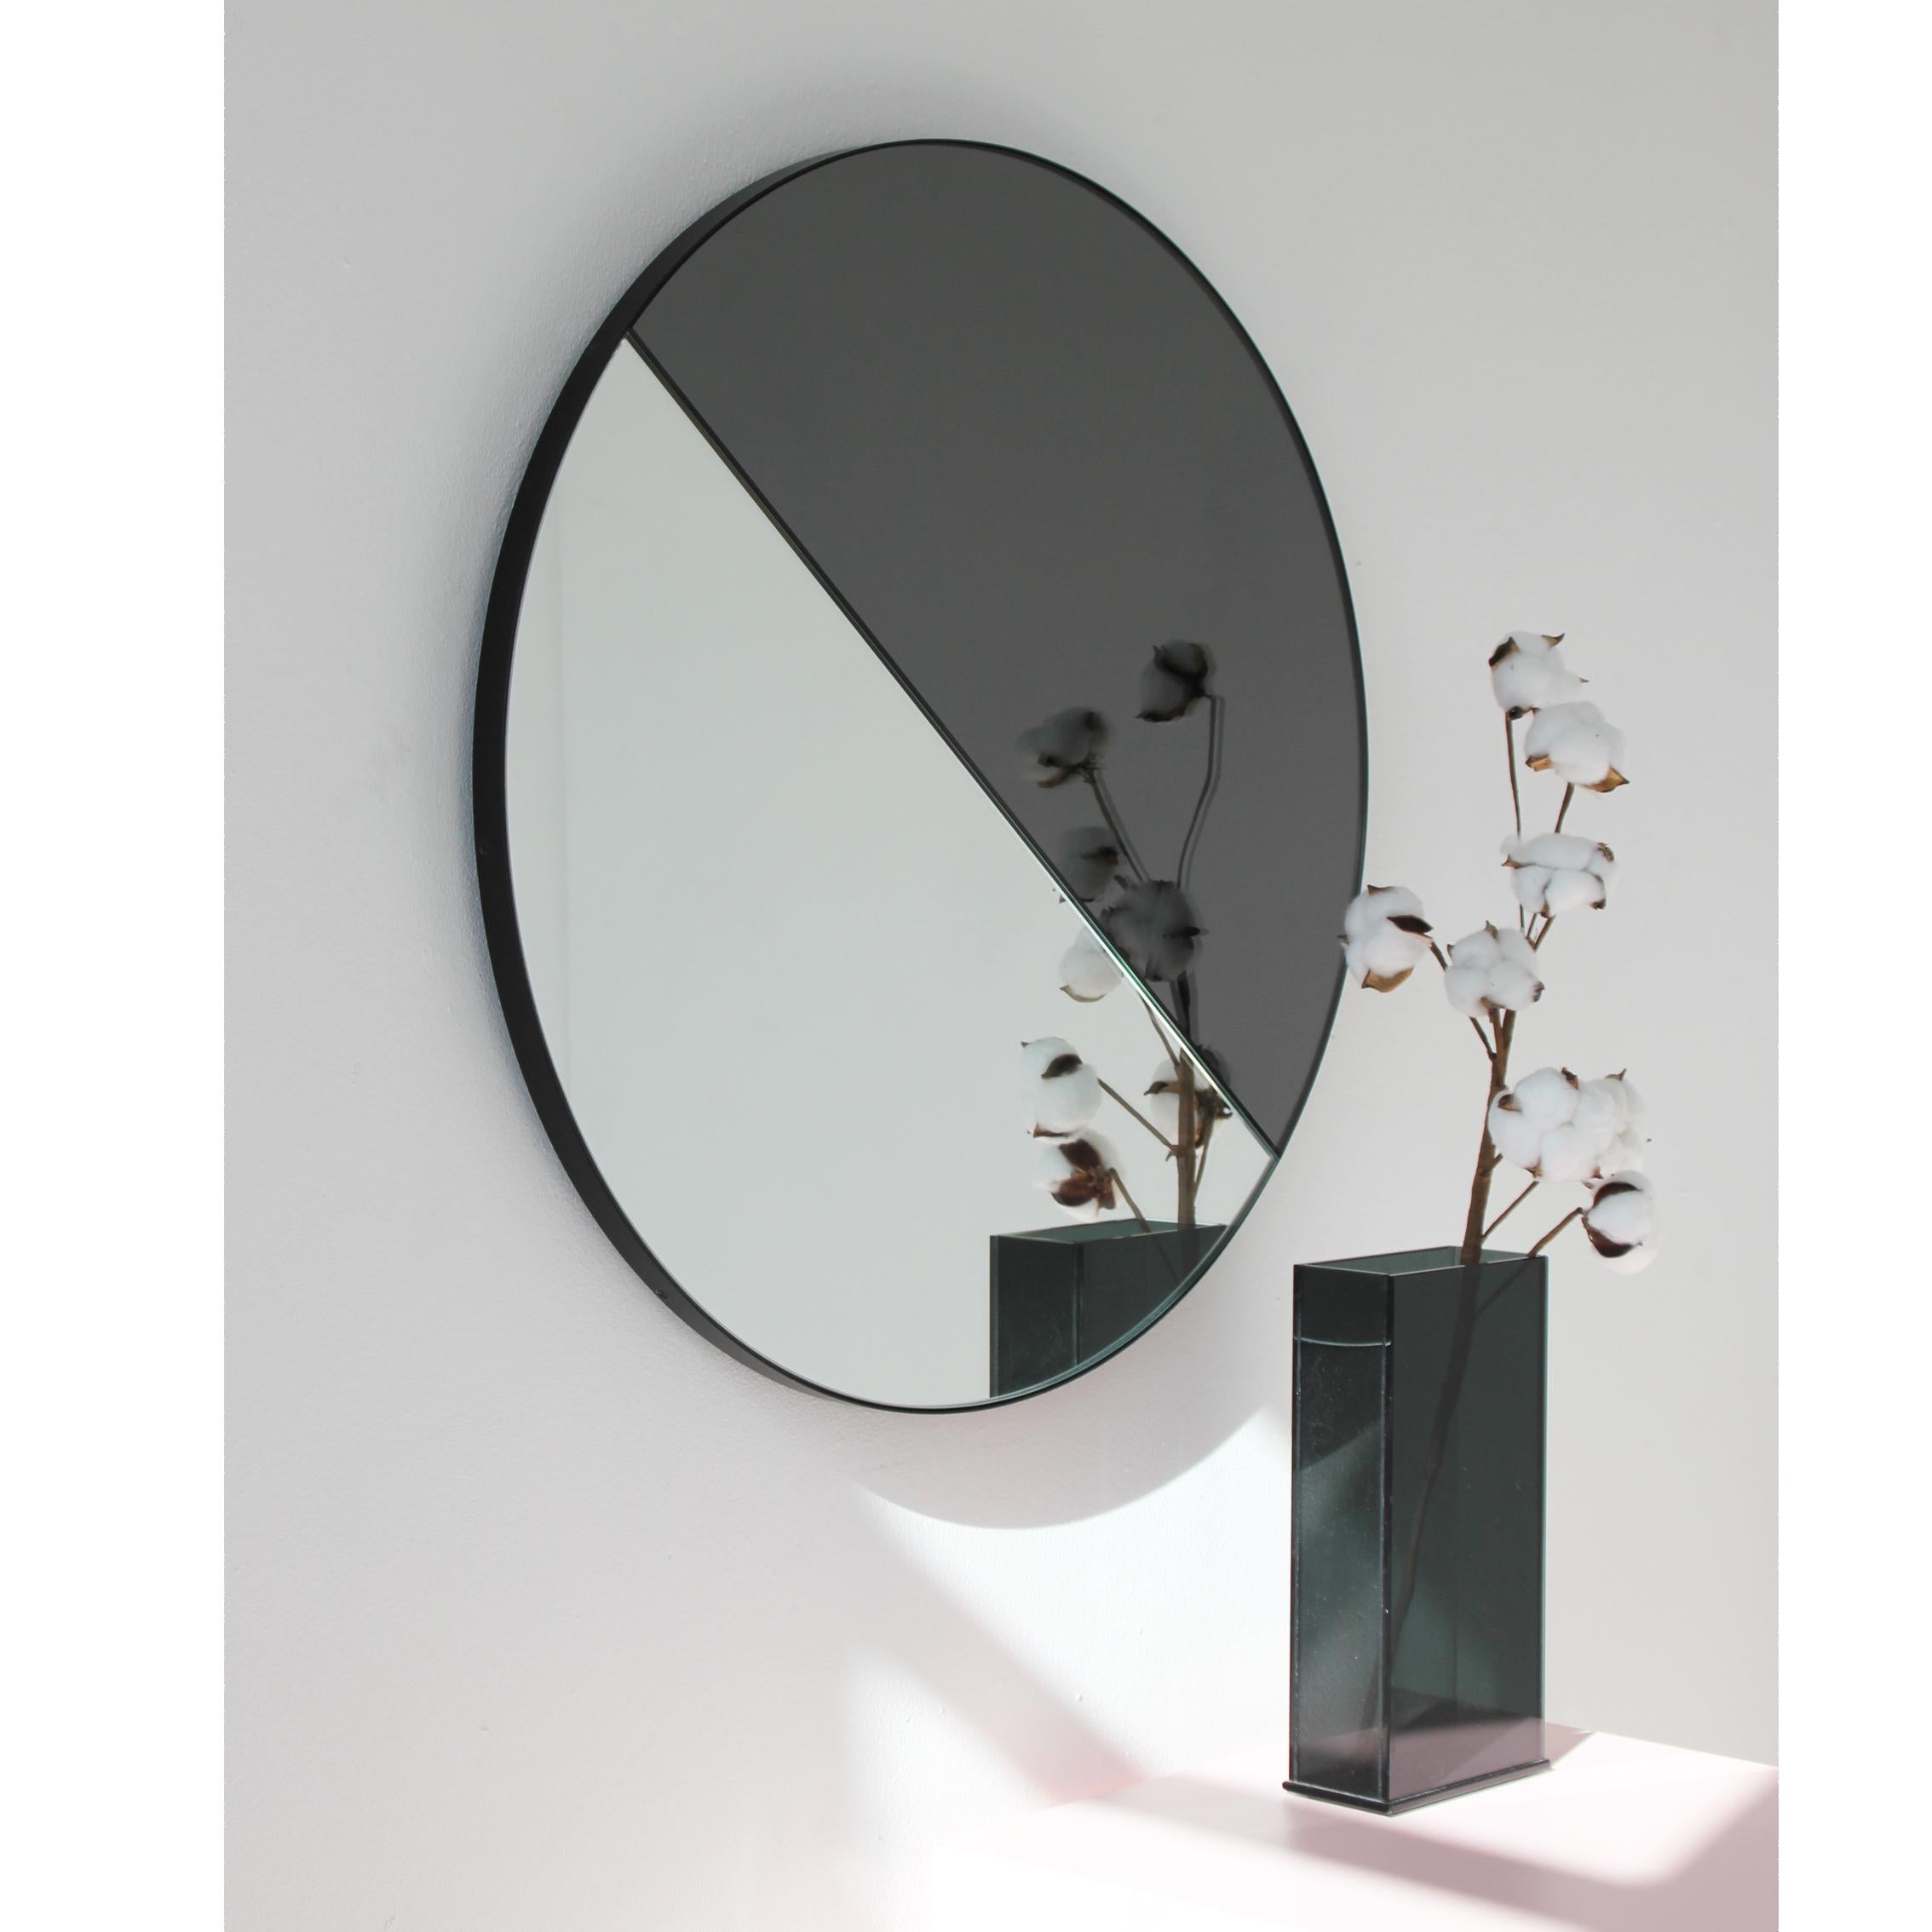 British Orbis Dualis Mixed Tinted Silver Black Round Mirror with Black Frame, Regular For Sale